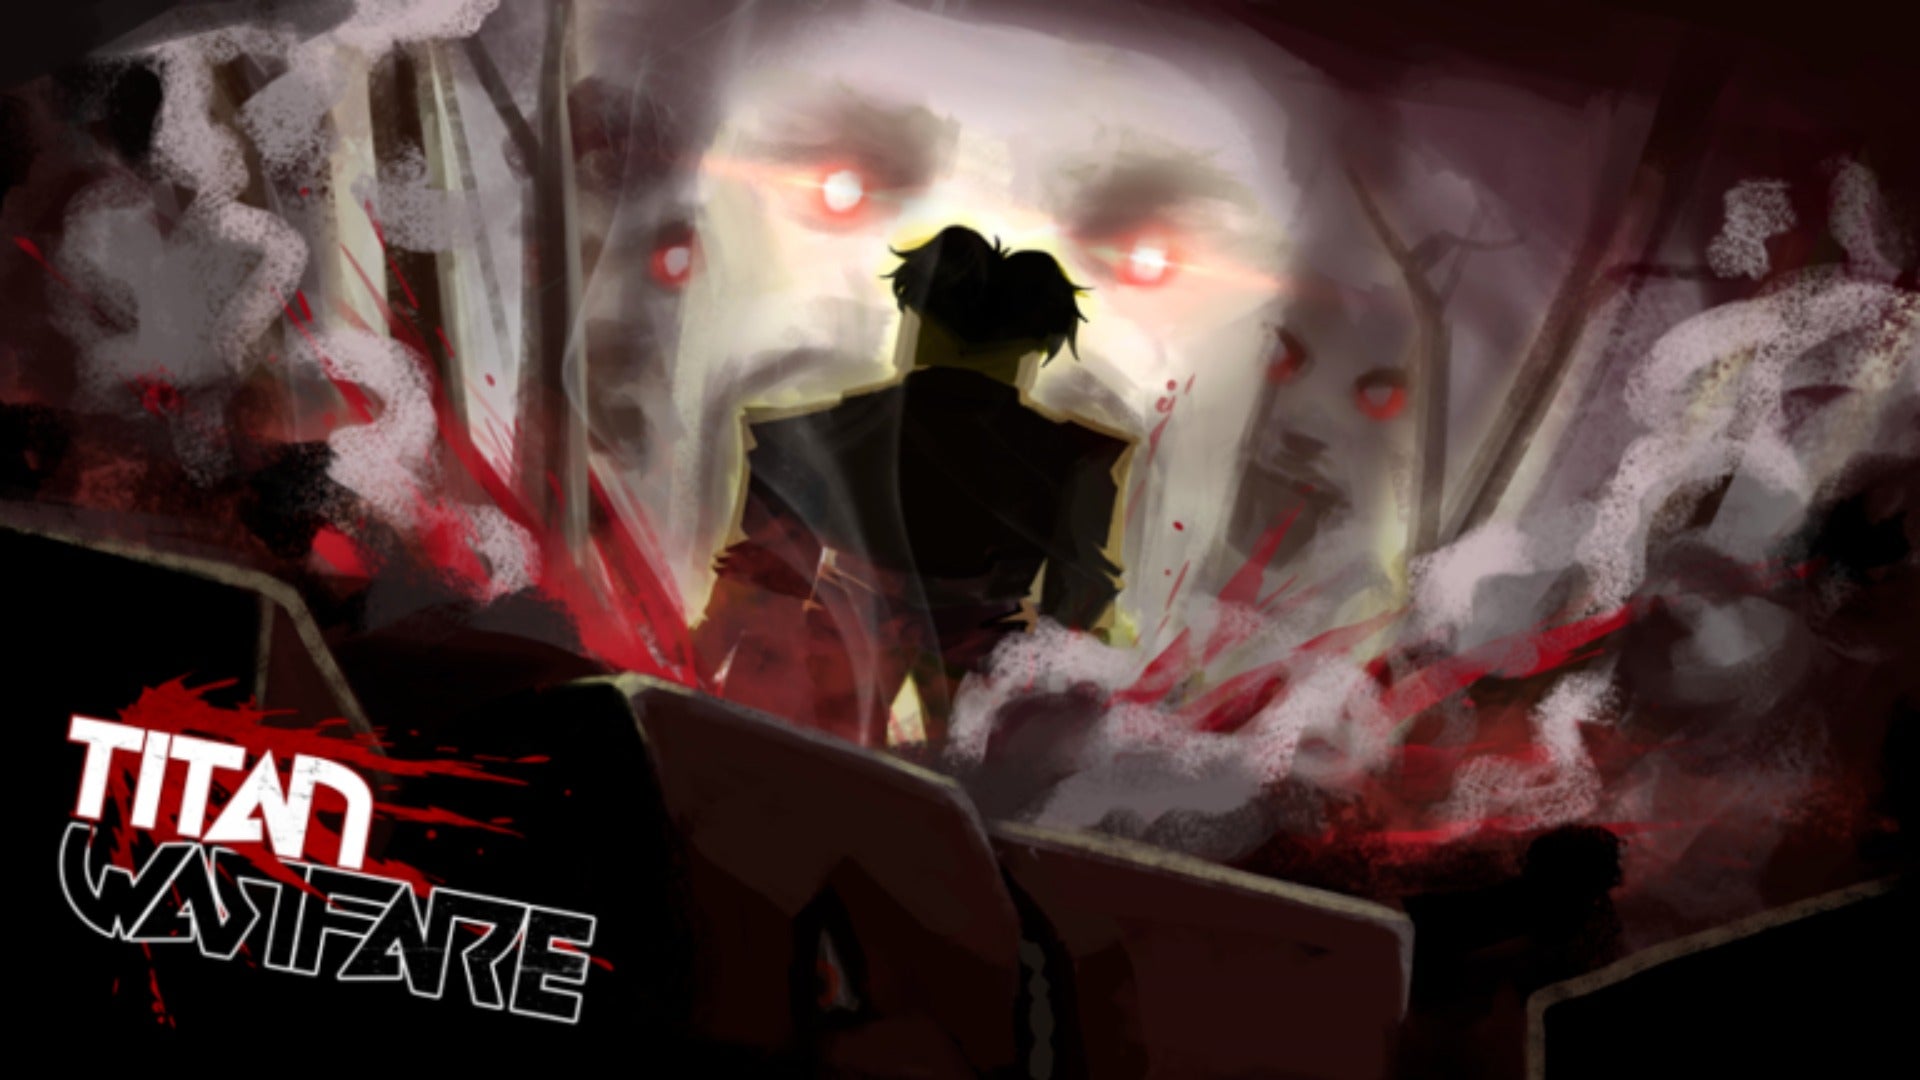 Titan Warfare promo art, a player facing the head of a titan with glowing red eyes